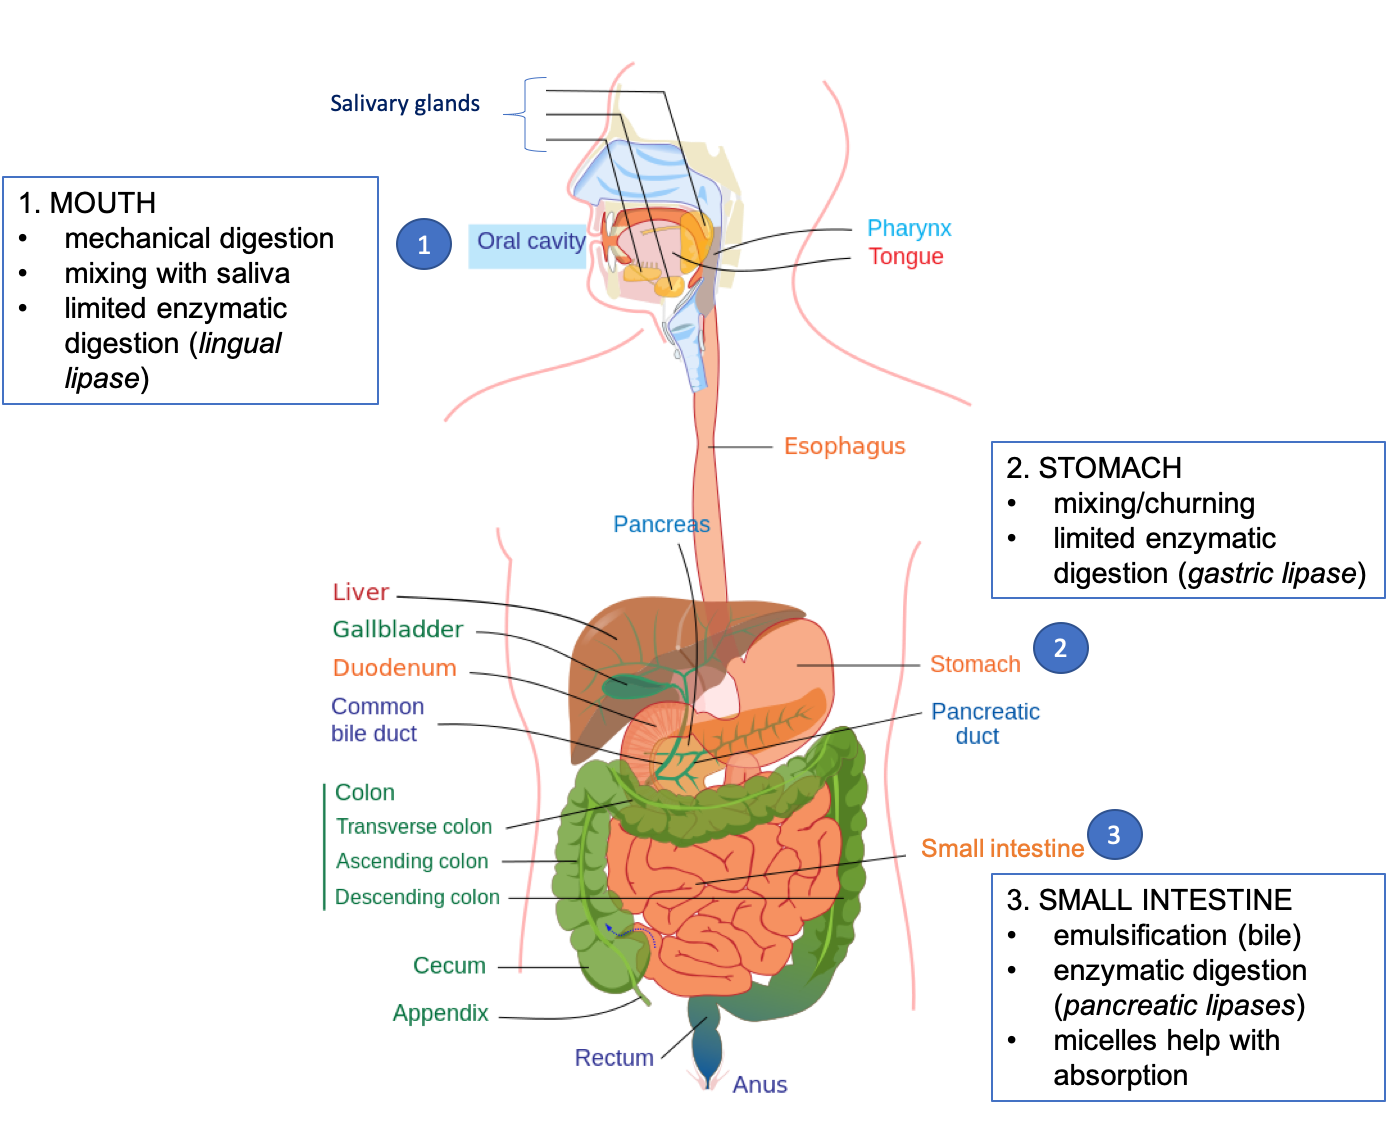 Cartoon diagram showing the organs of the gastrointestinal tract and the steps of lipid digestion that occur in each organ. In the mouth: mechanical digestion, mixing with saliva, and limited enzymatic digestion (lingual lipase). In the stomach: mixing/churning, limited enzymatic digestion (gastric lipase). In the small intestine: emulsification (bile), enzymatic digestion (pancreatic lipases), micelles help with absorption.